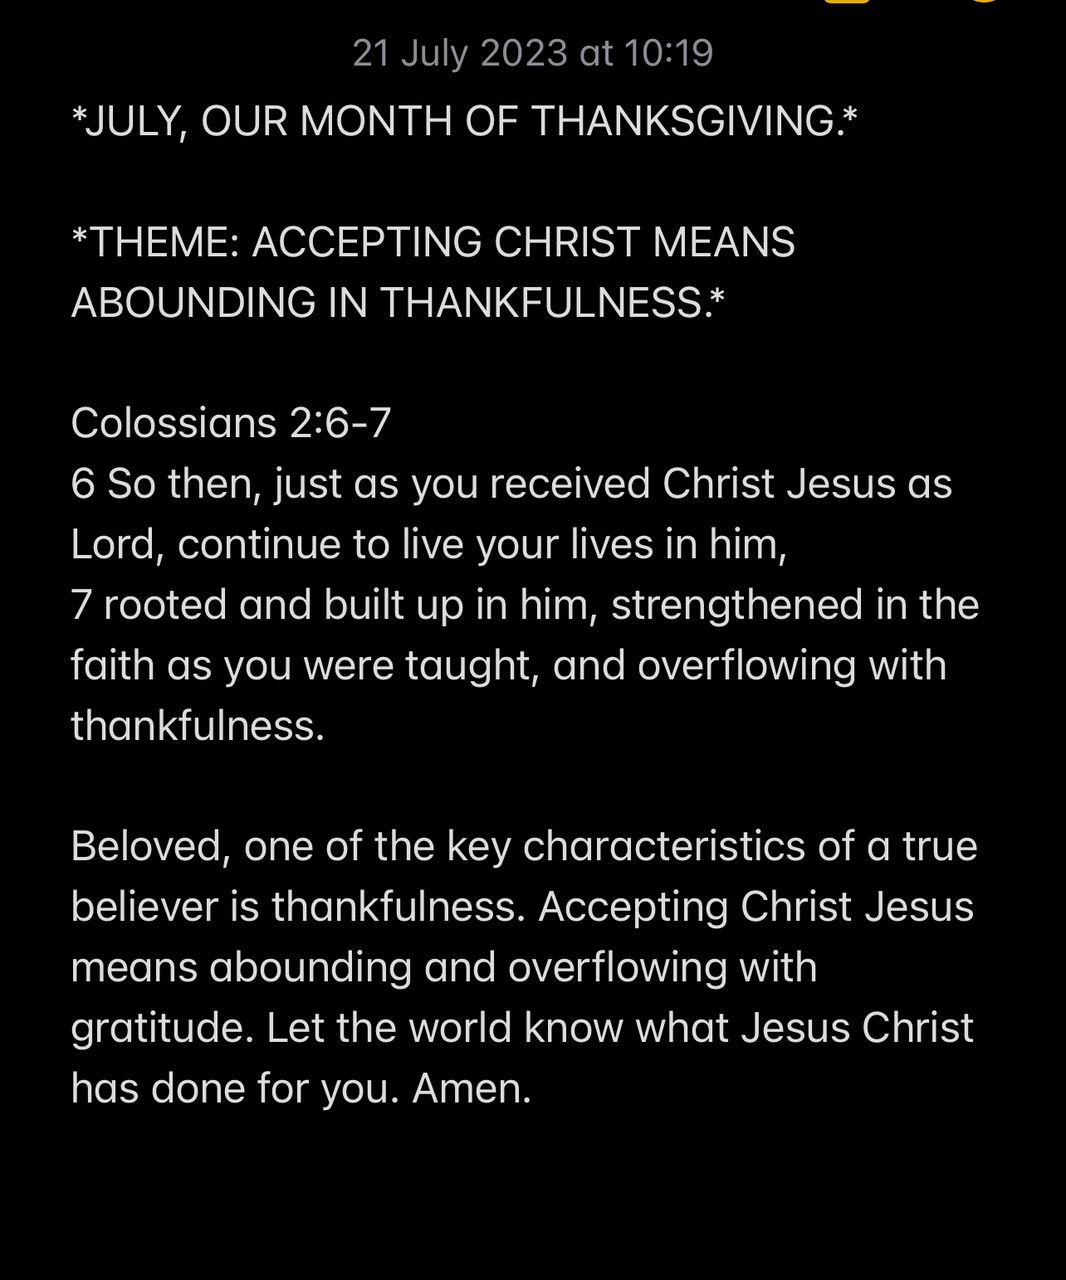 ACCEPTING CHRIST MEANS ABOUNDING IN THANKFULNESS.